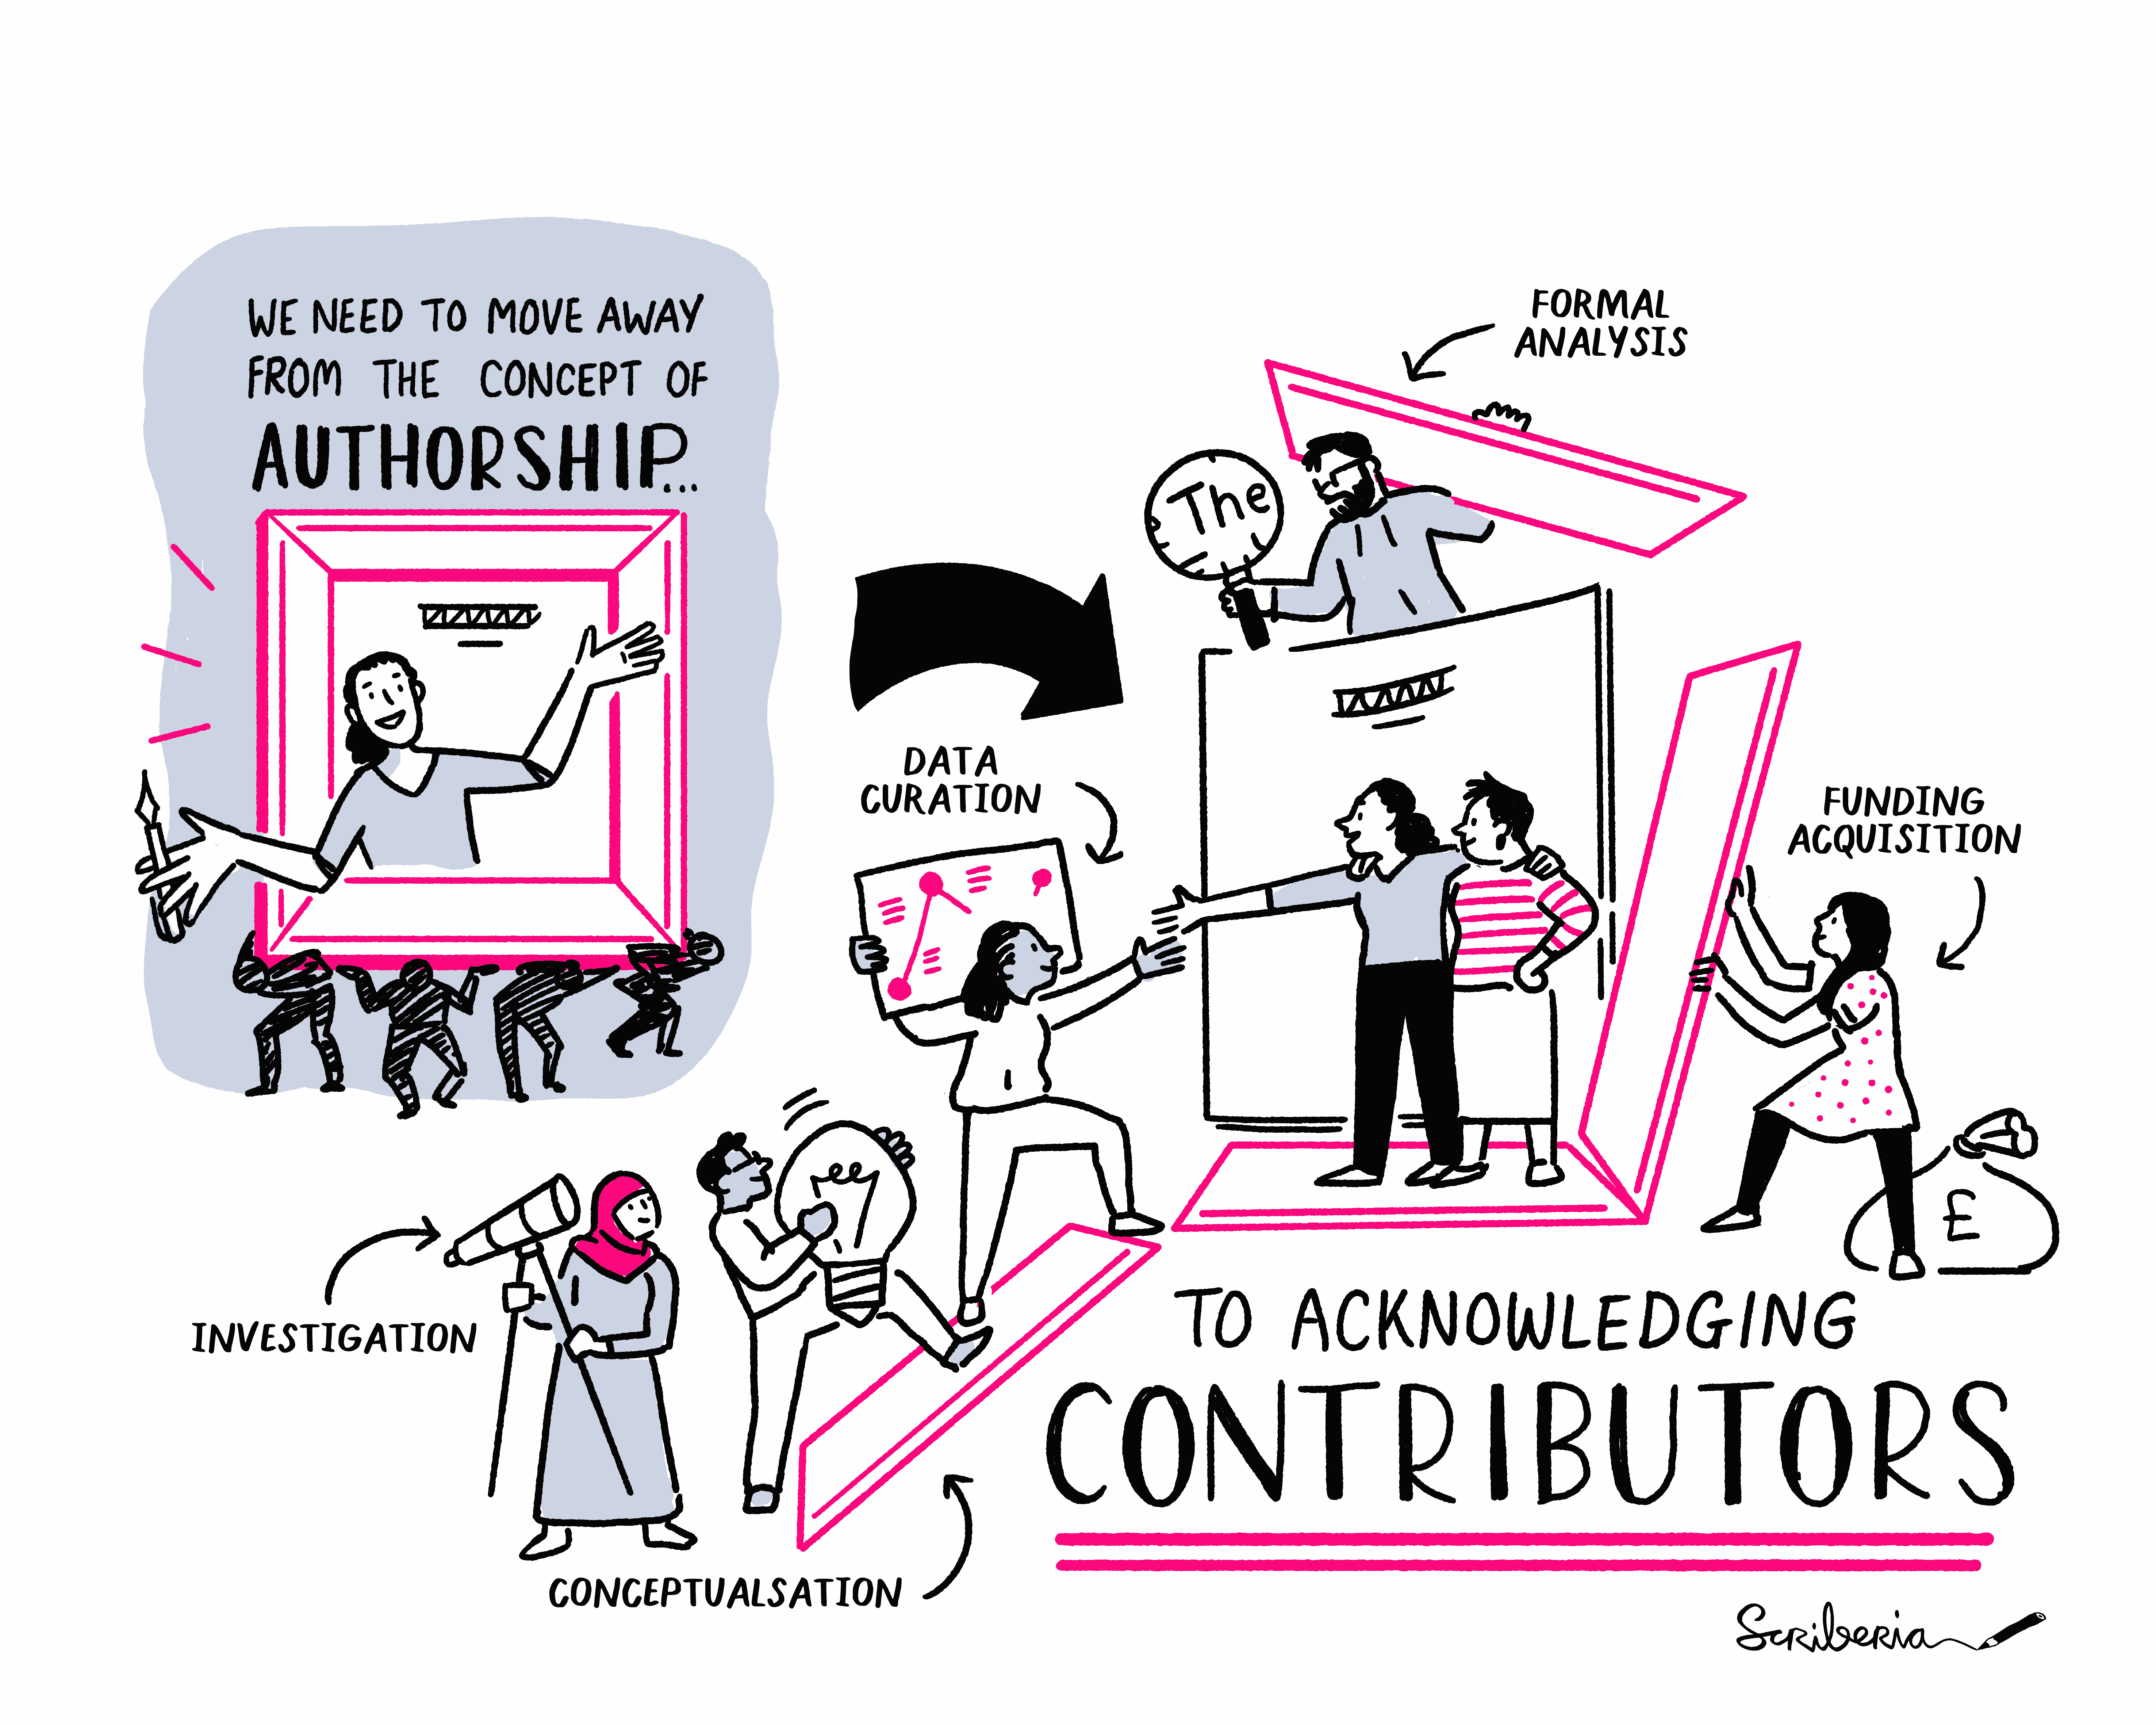 The image shows the current system of authorship with many people holding up one person who is receiving the most credit. Then it shows lots of contributors working together to bring together different contributions of a project to publish a project with all these contributions being equally acknowledged.